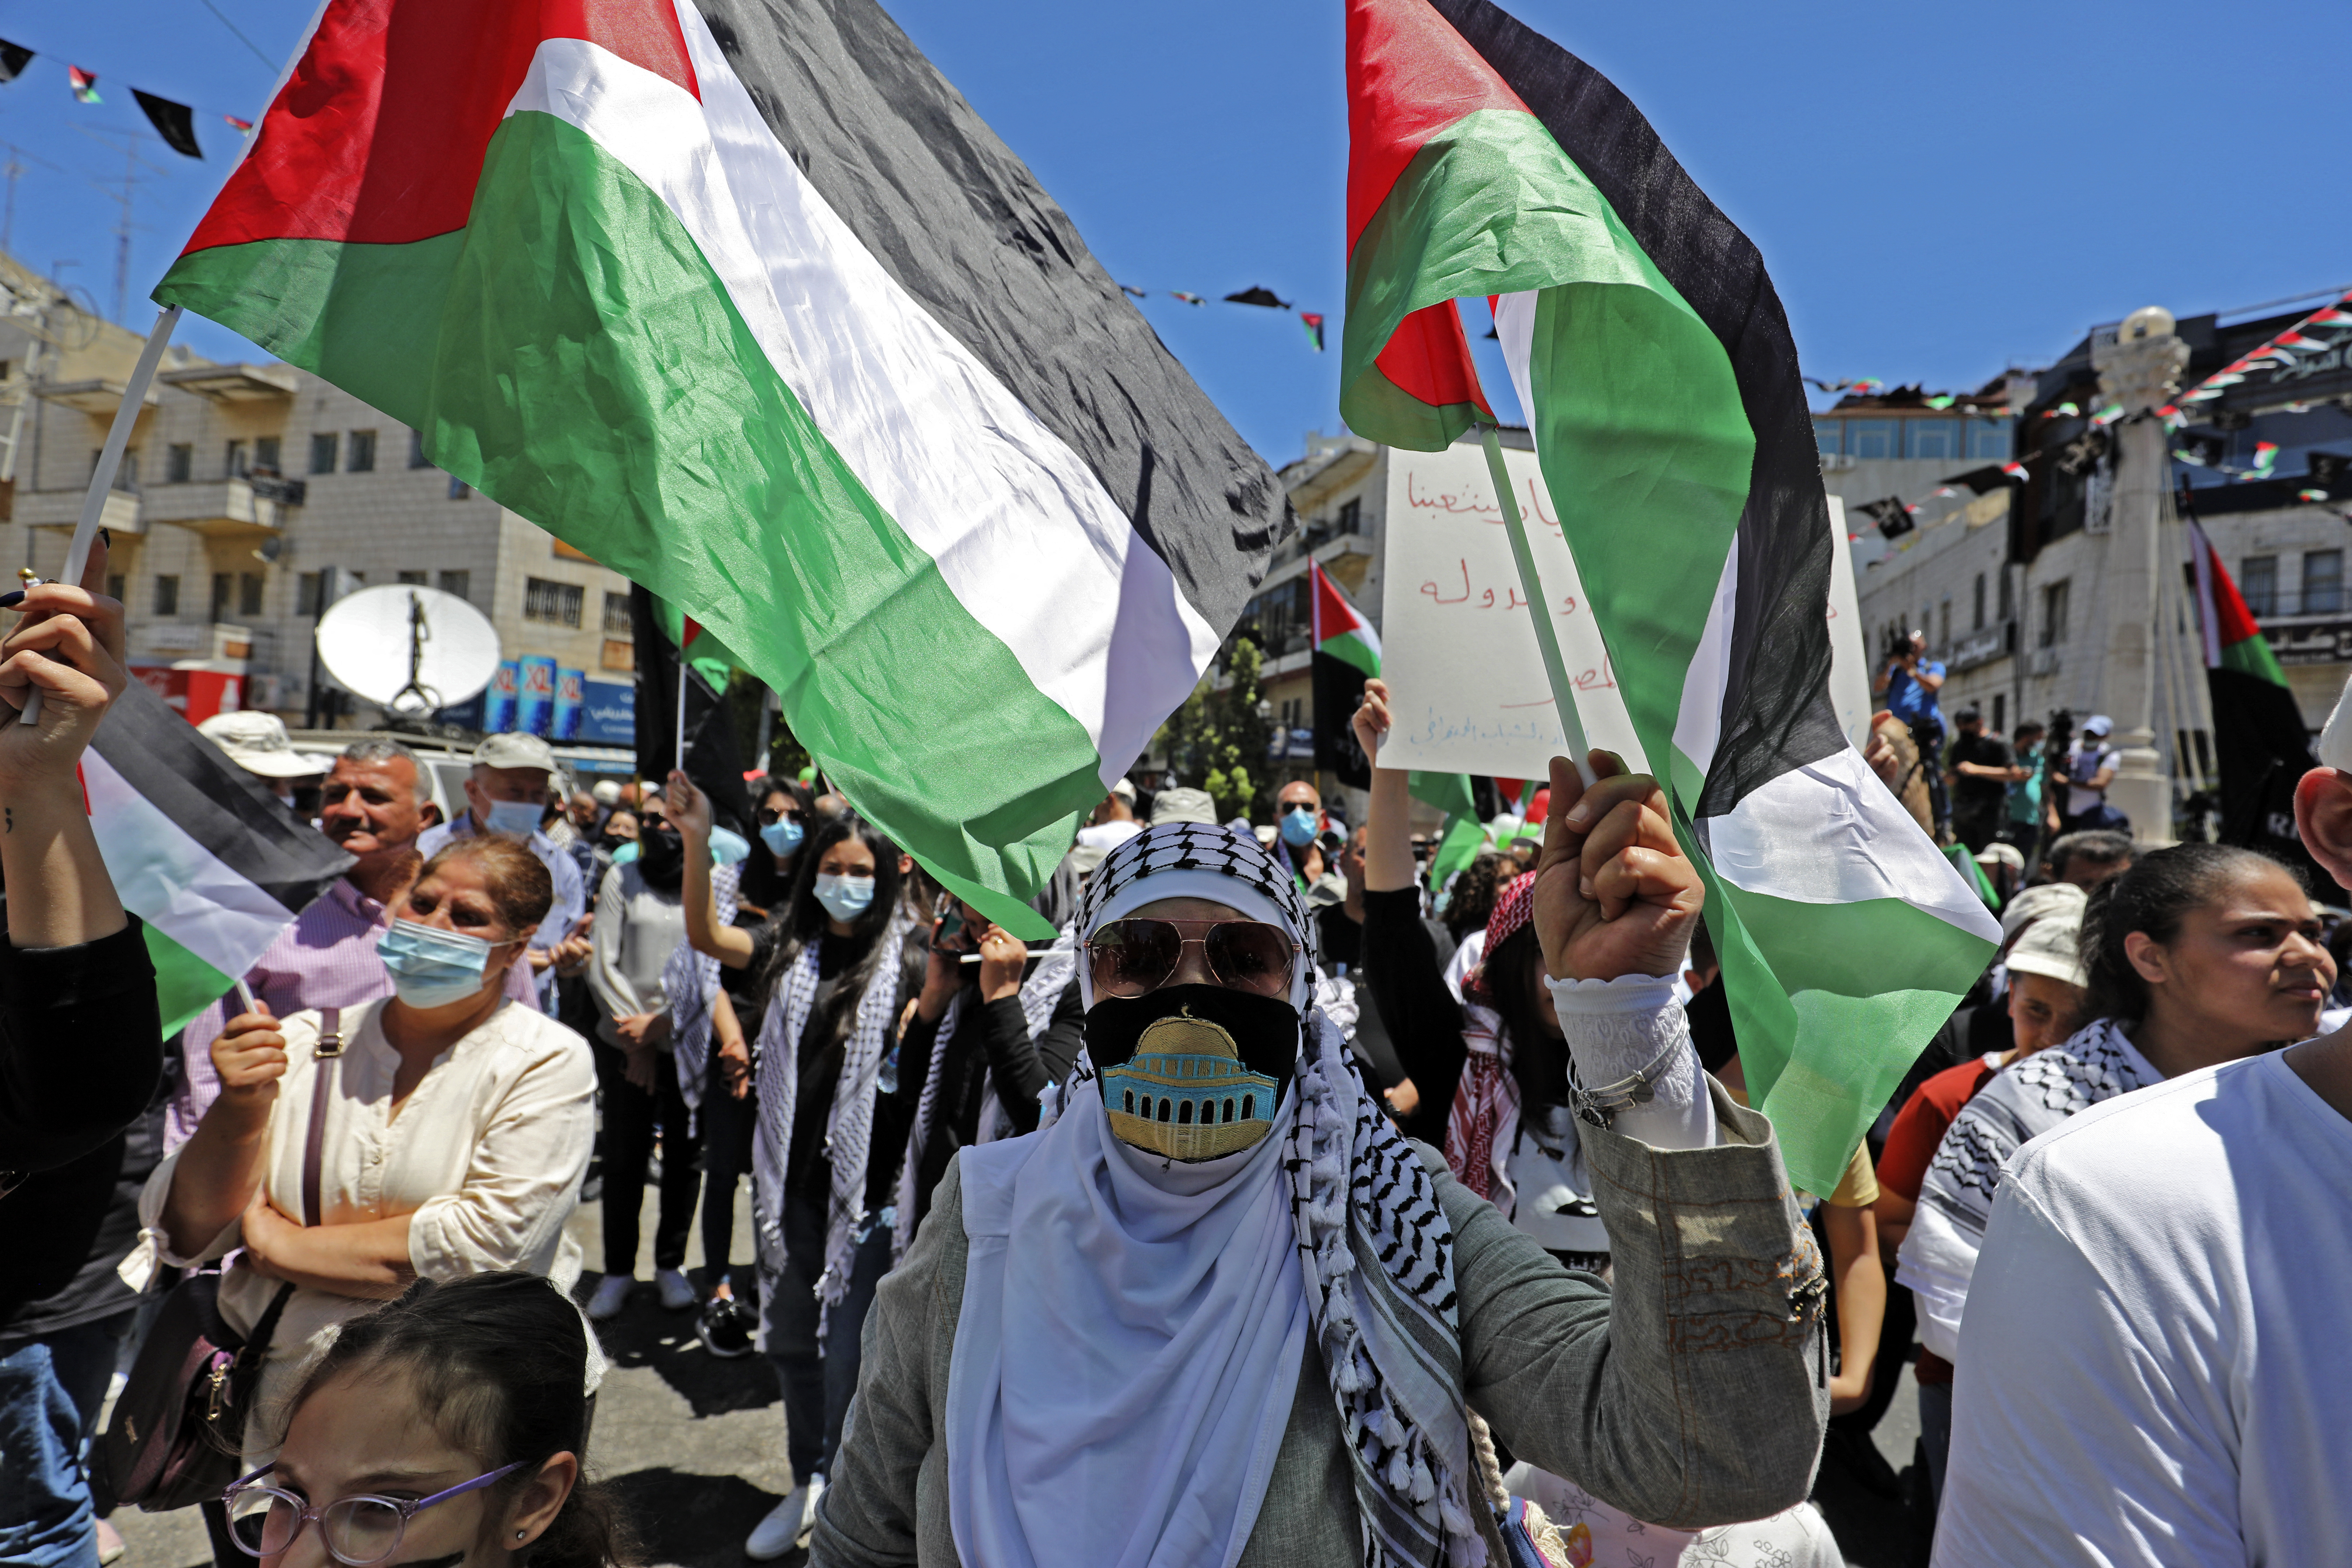 Palestinians protest in the occupied West Bank village of Salem on 15 May 2021 (AFP)